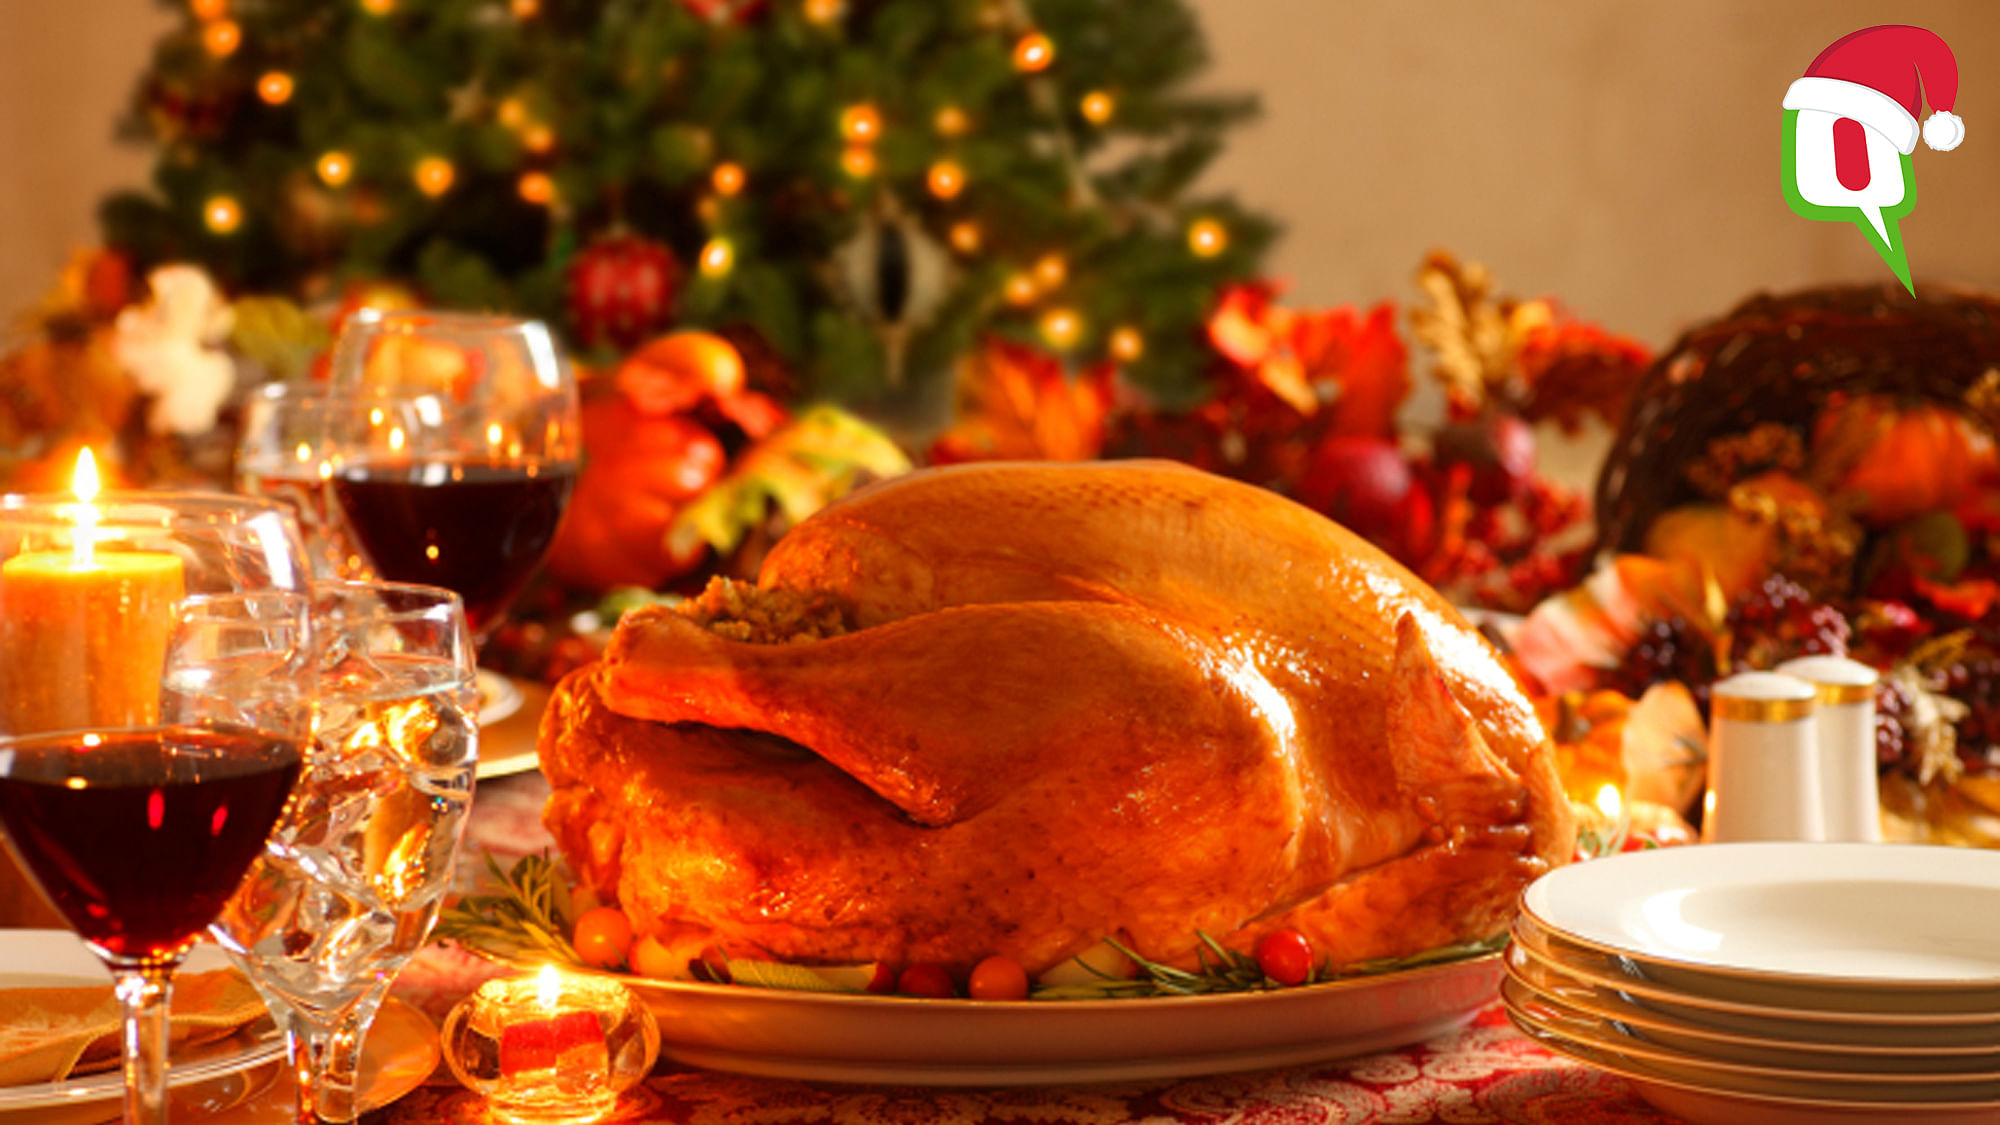 Coz ’Tis the Season: 5 Delicious Christmas Dishes You’ll Love